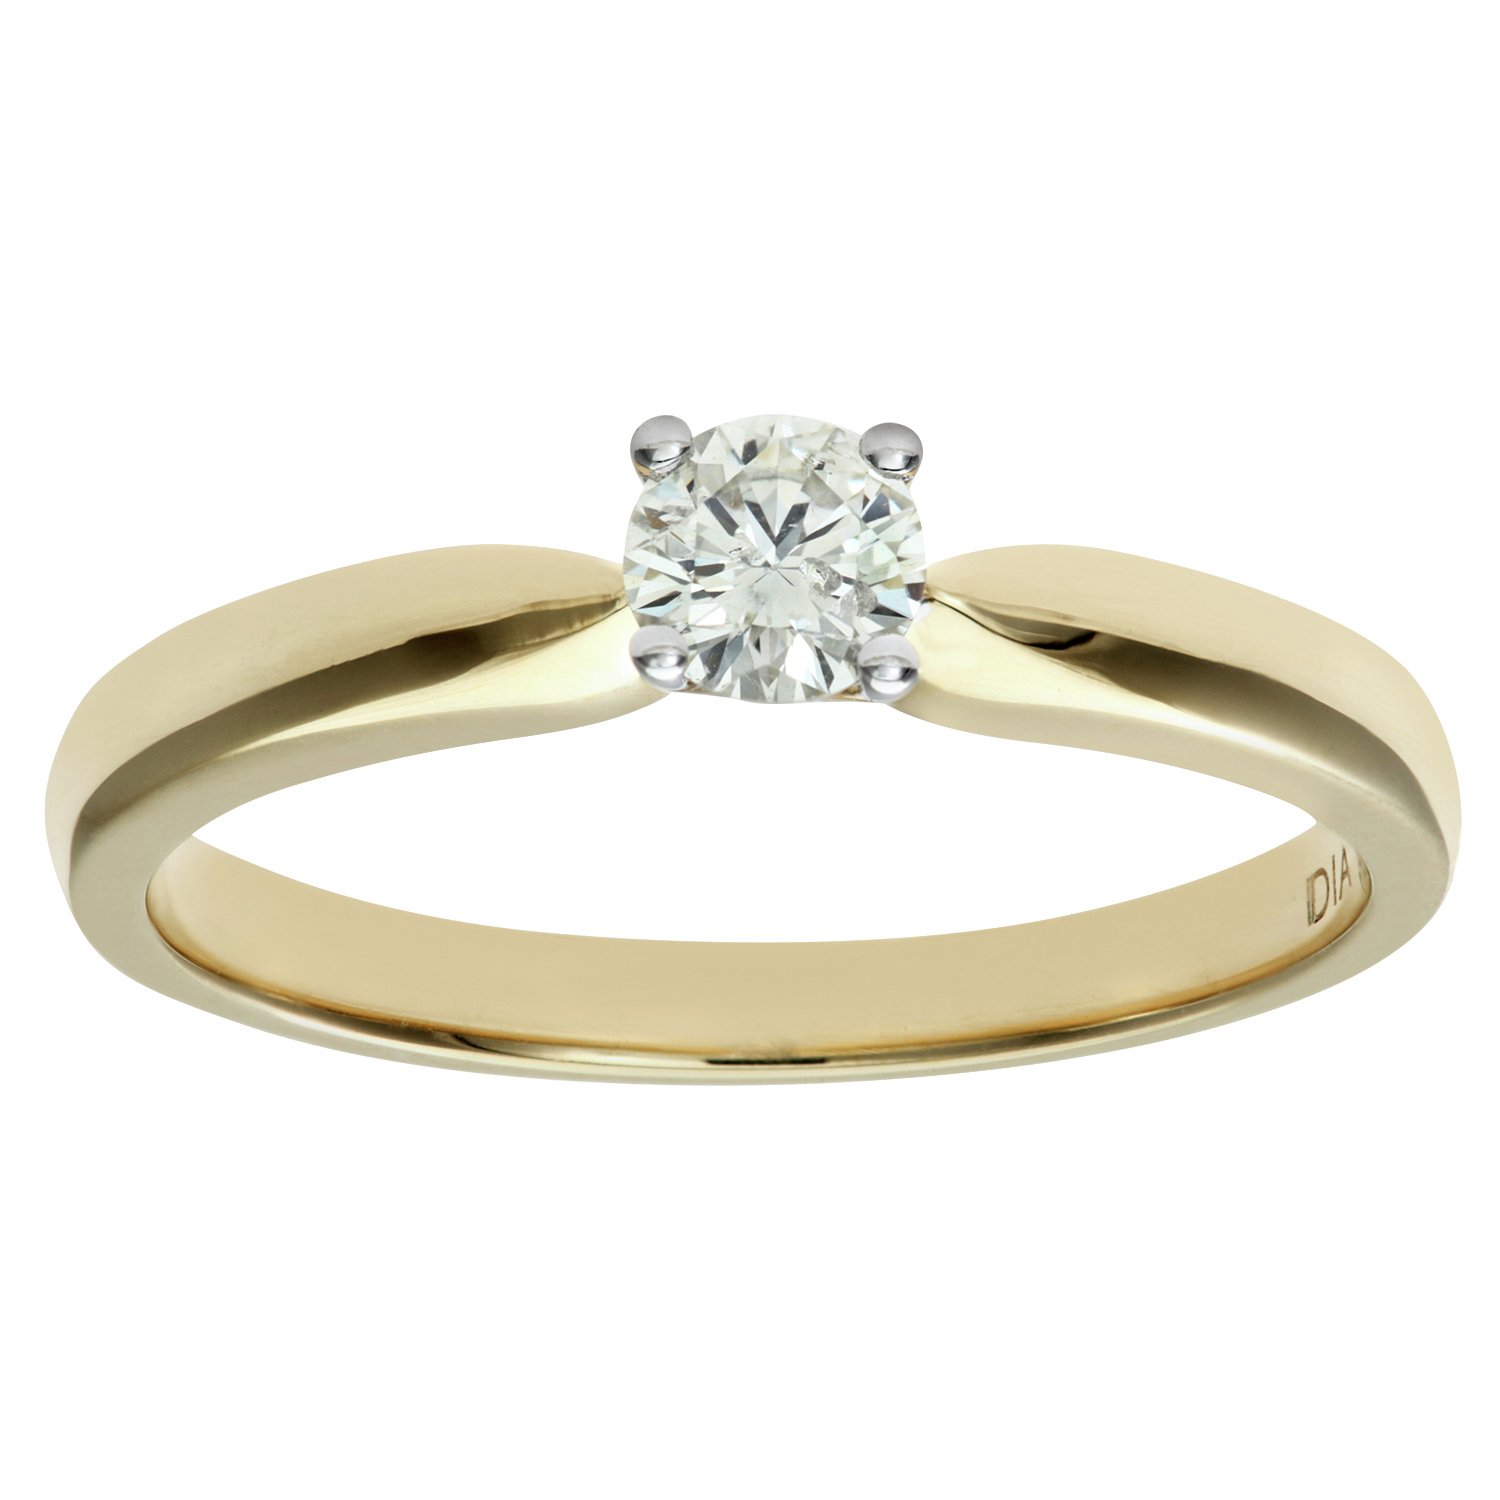 Everlasting Love 18ct Gold 0.25ct Solitaire Ring - Size K